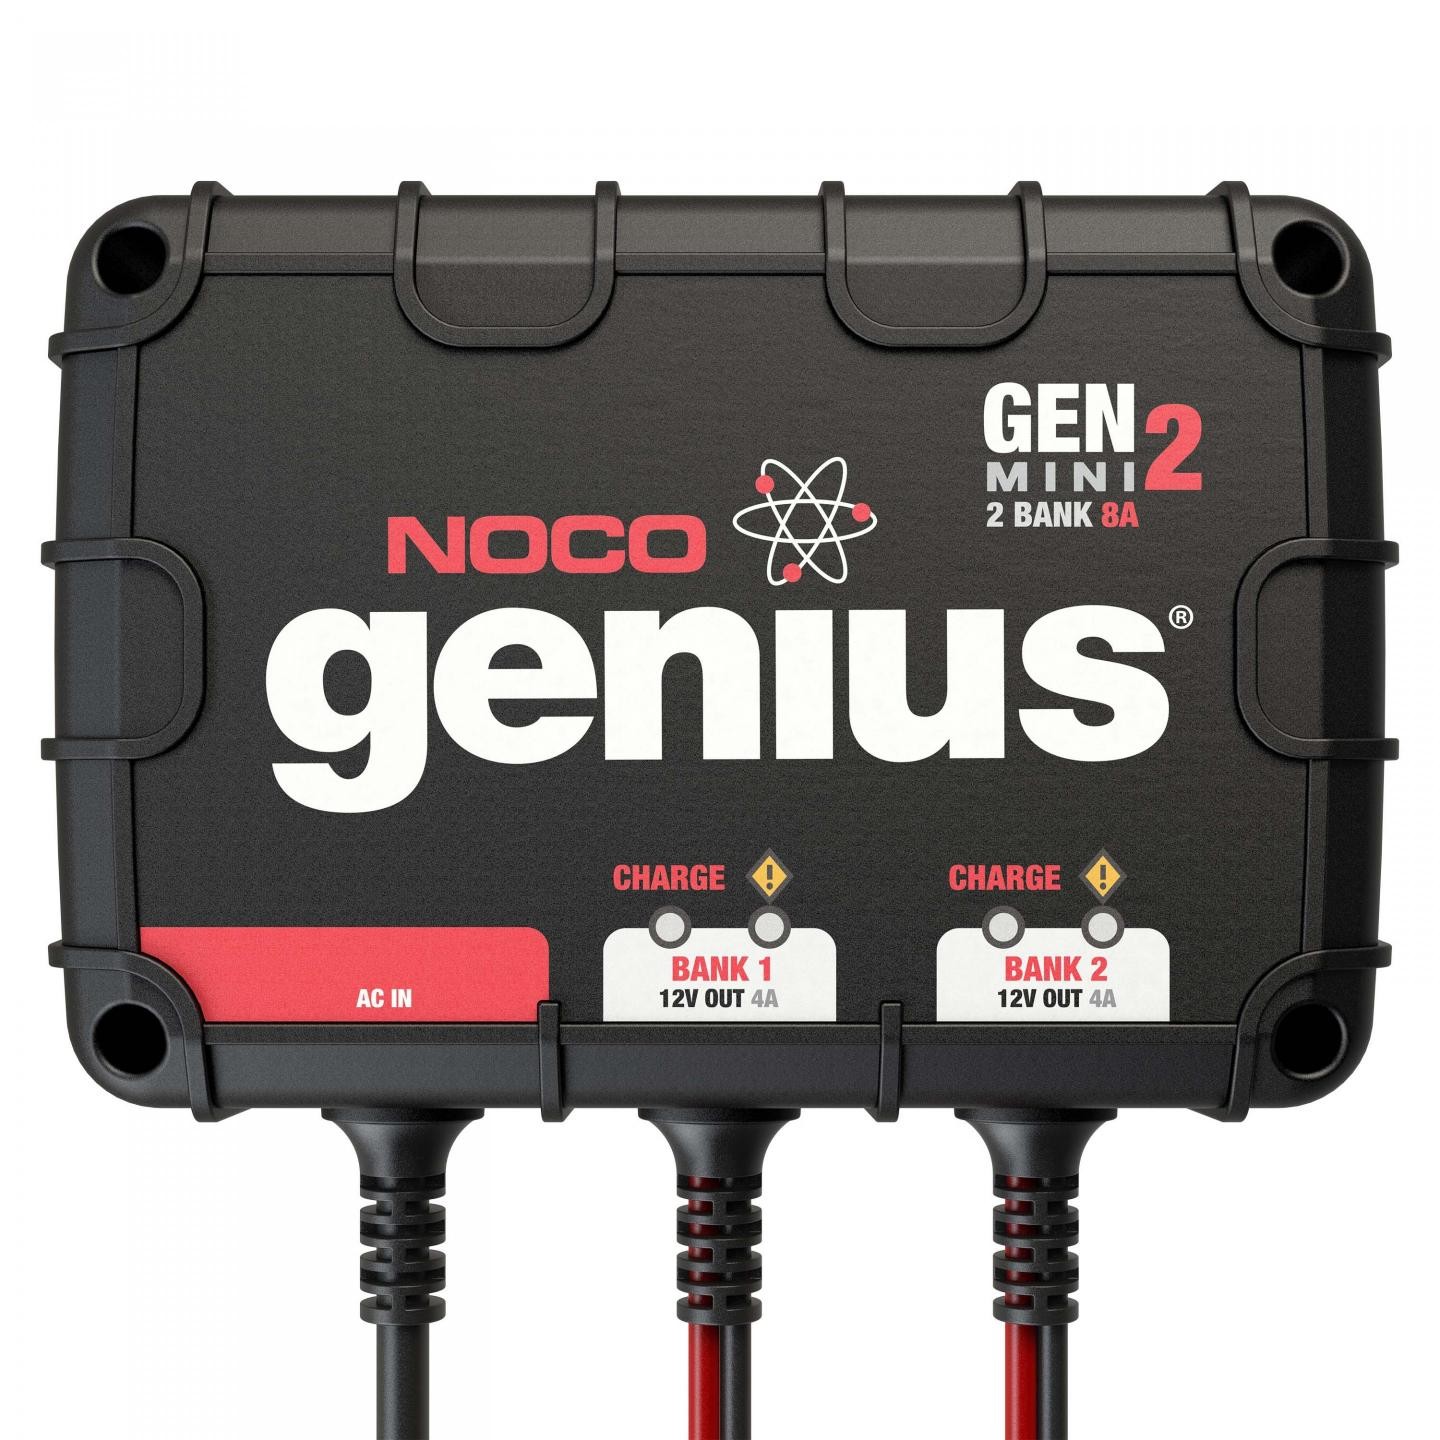 NOCO - 2-Bank 8A On-Board Battery Charger - GENM2